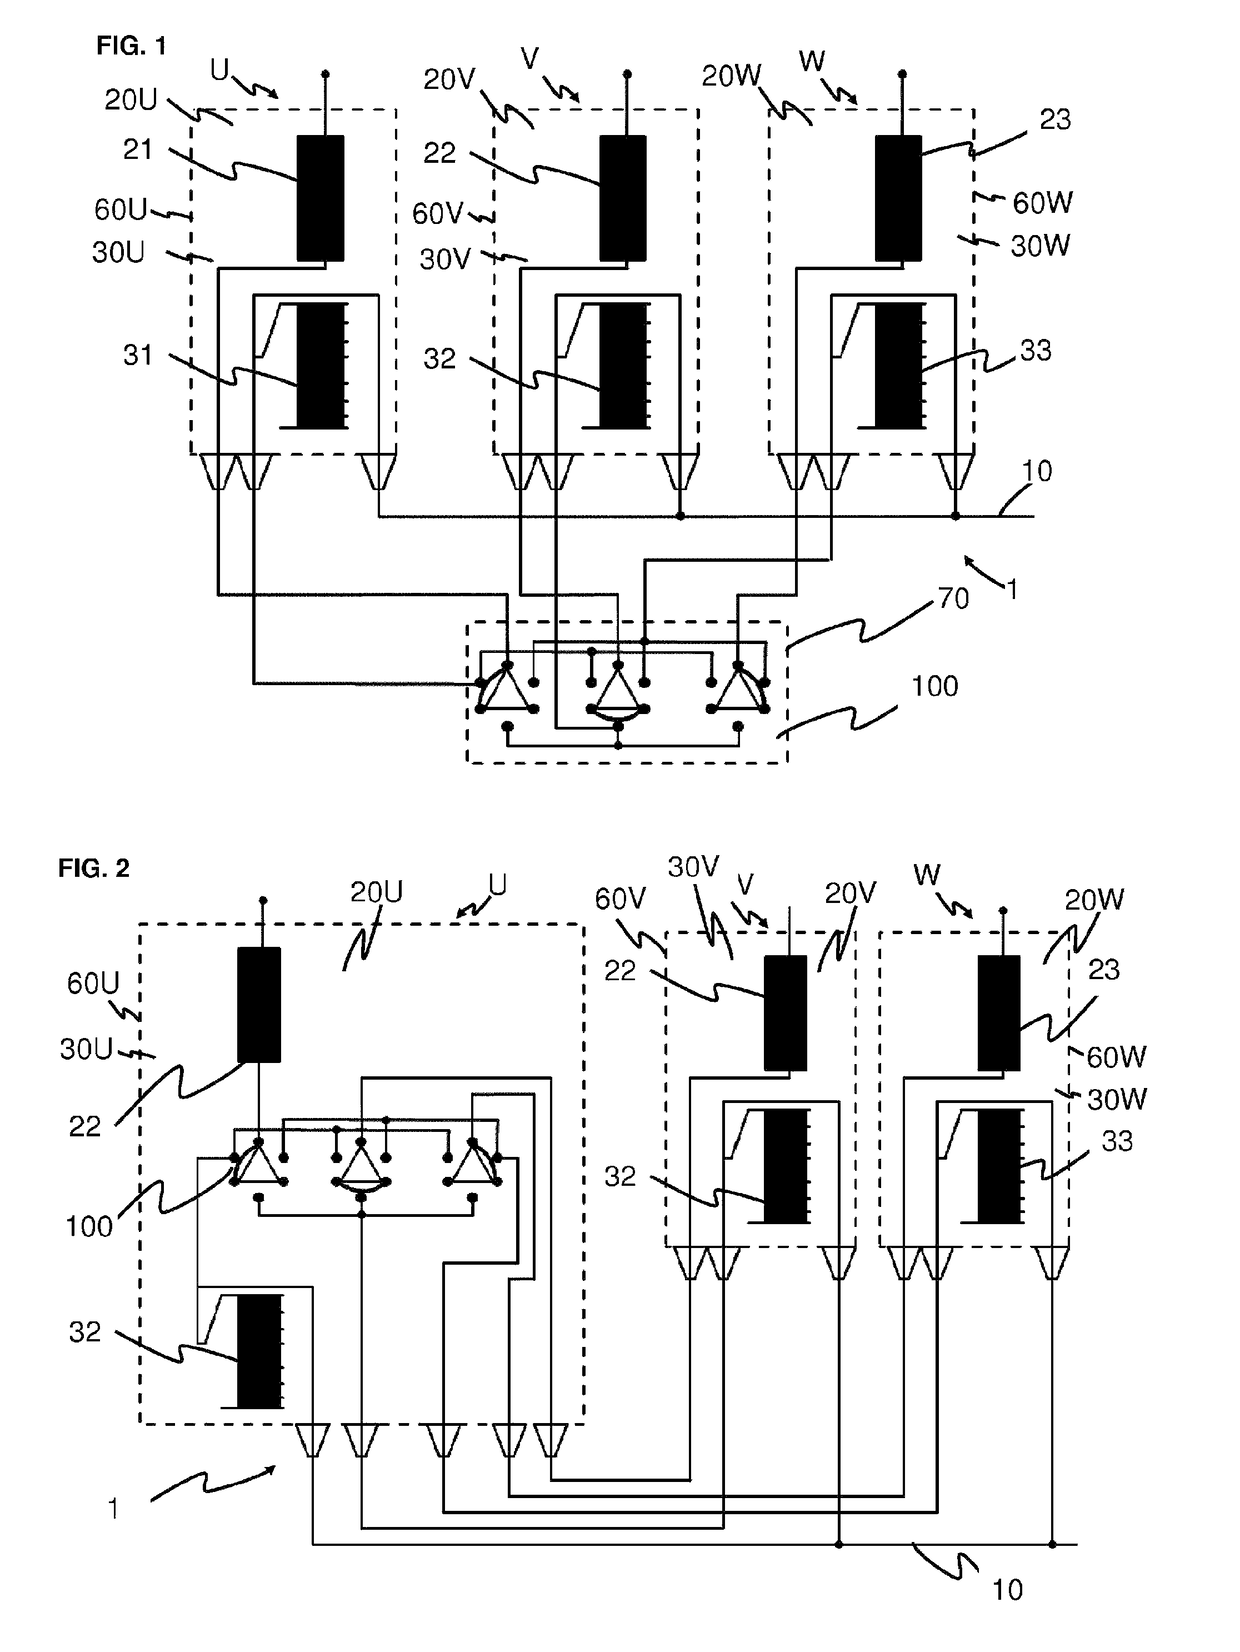 Electrical switching system for a three-phase network